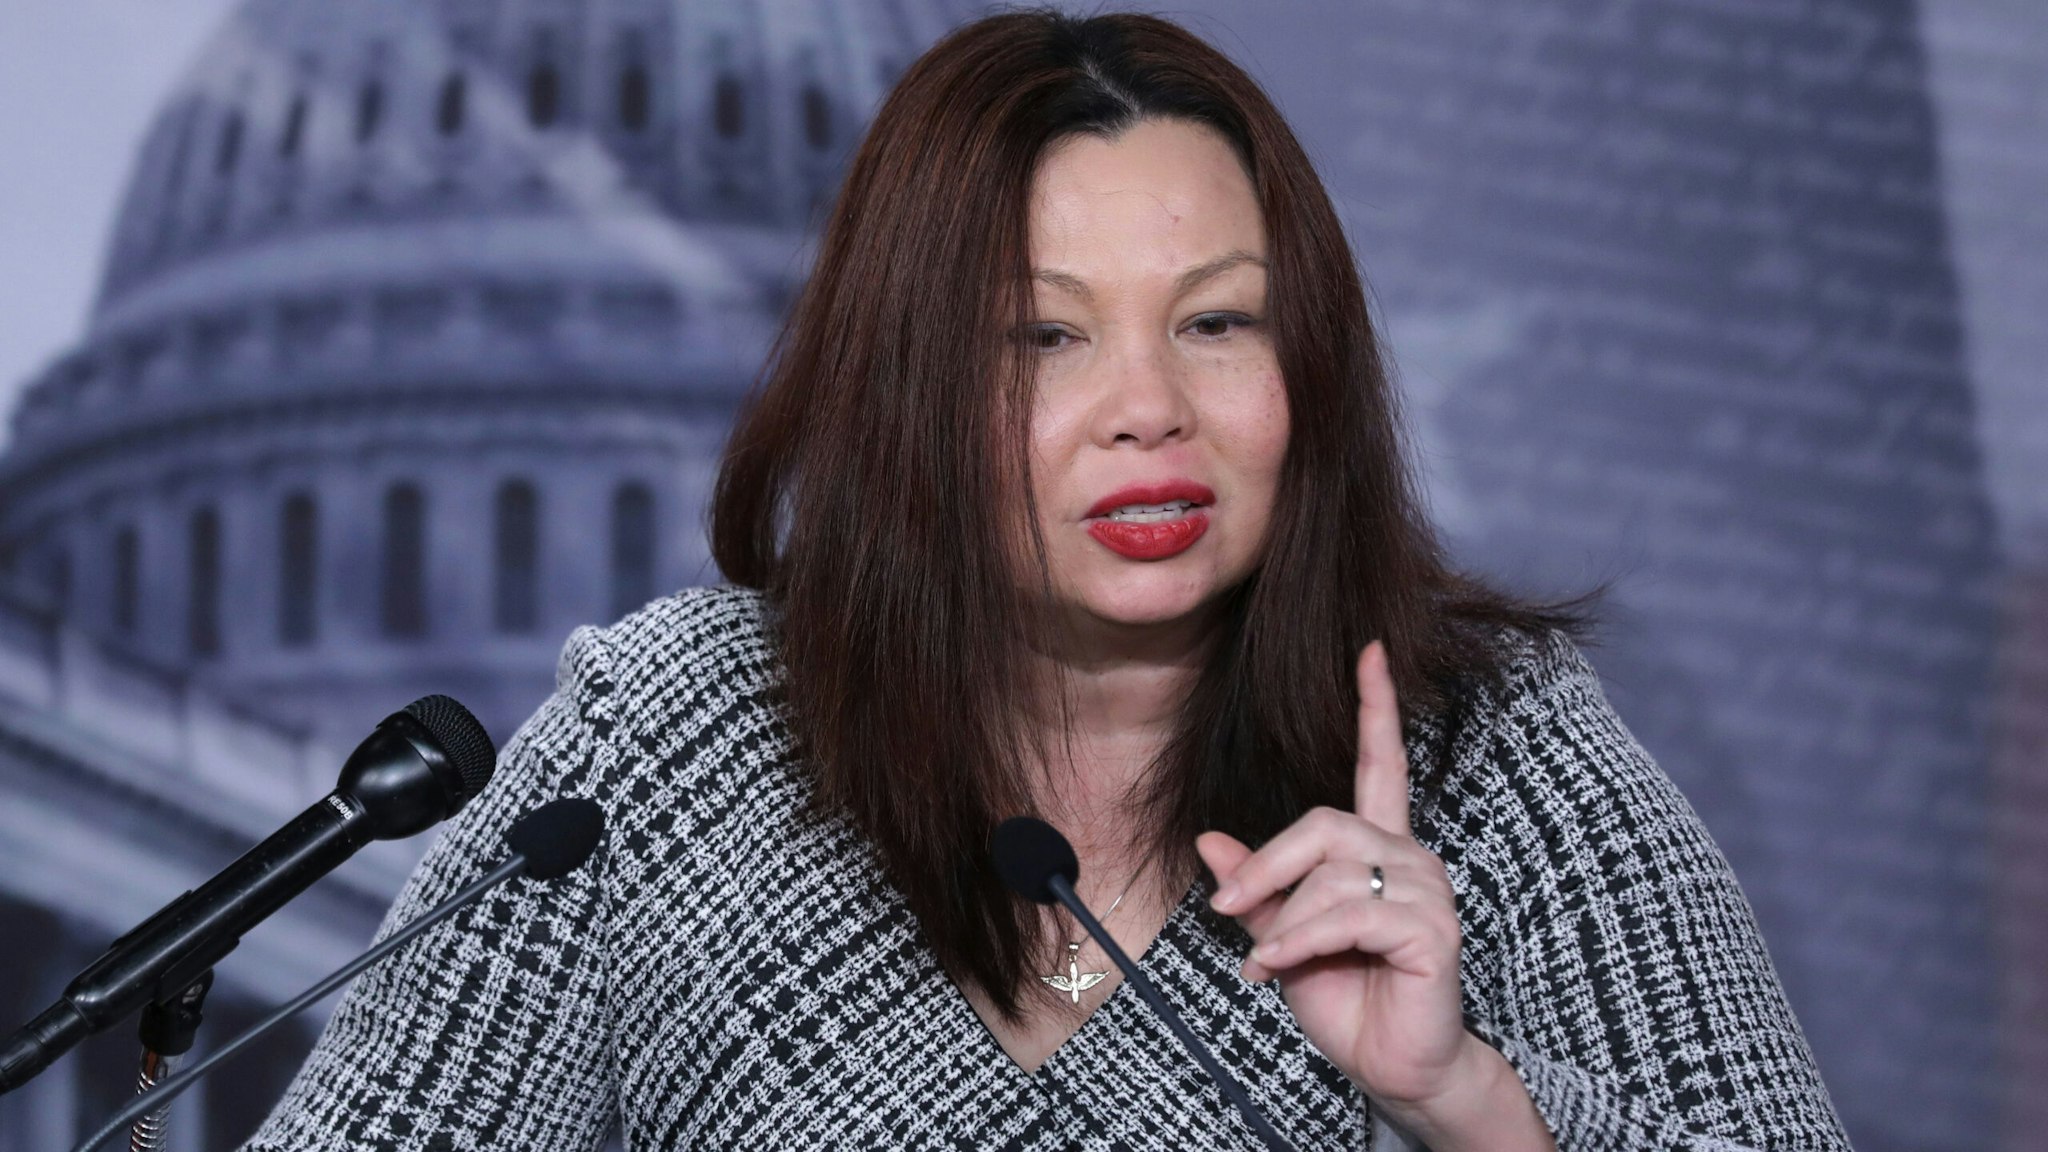 WASHINGTON, DC - NOVEMBER 17: Sen. Tammy Duckworth (D-IL) talks to reporters during a news conference at the U.S. Capitol on November 17, 2020 in Washington, DC. Duckworth and fellow Senate Democrats were critical of President Donald Trump's continued claims of election fraud and his refusal to concede the election to President-elect Joe Biden.